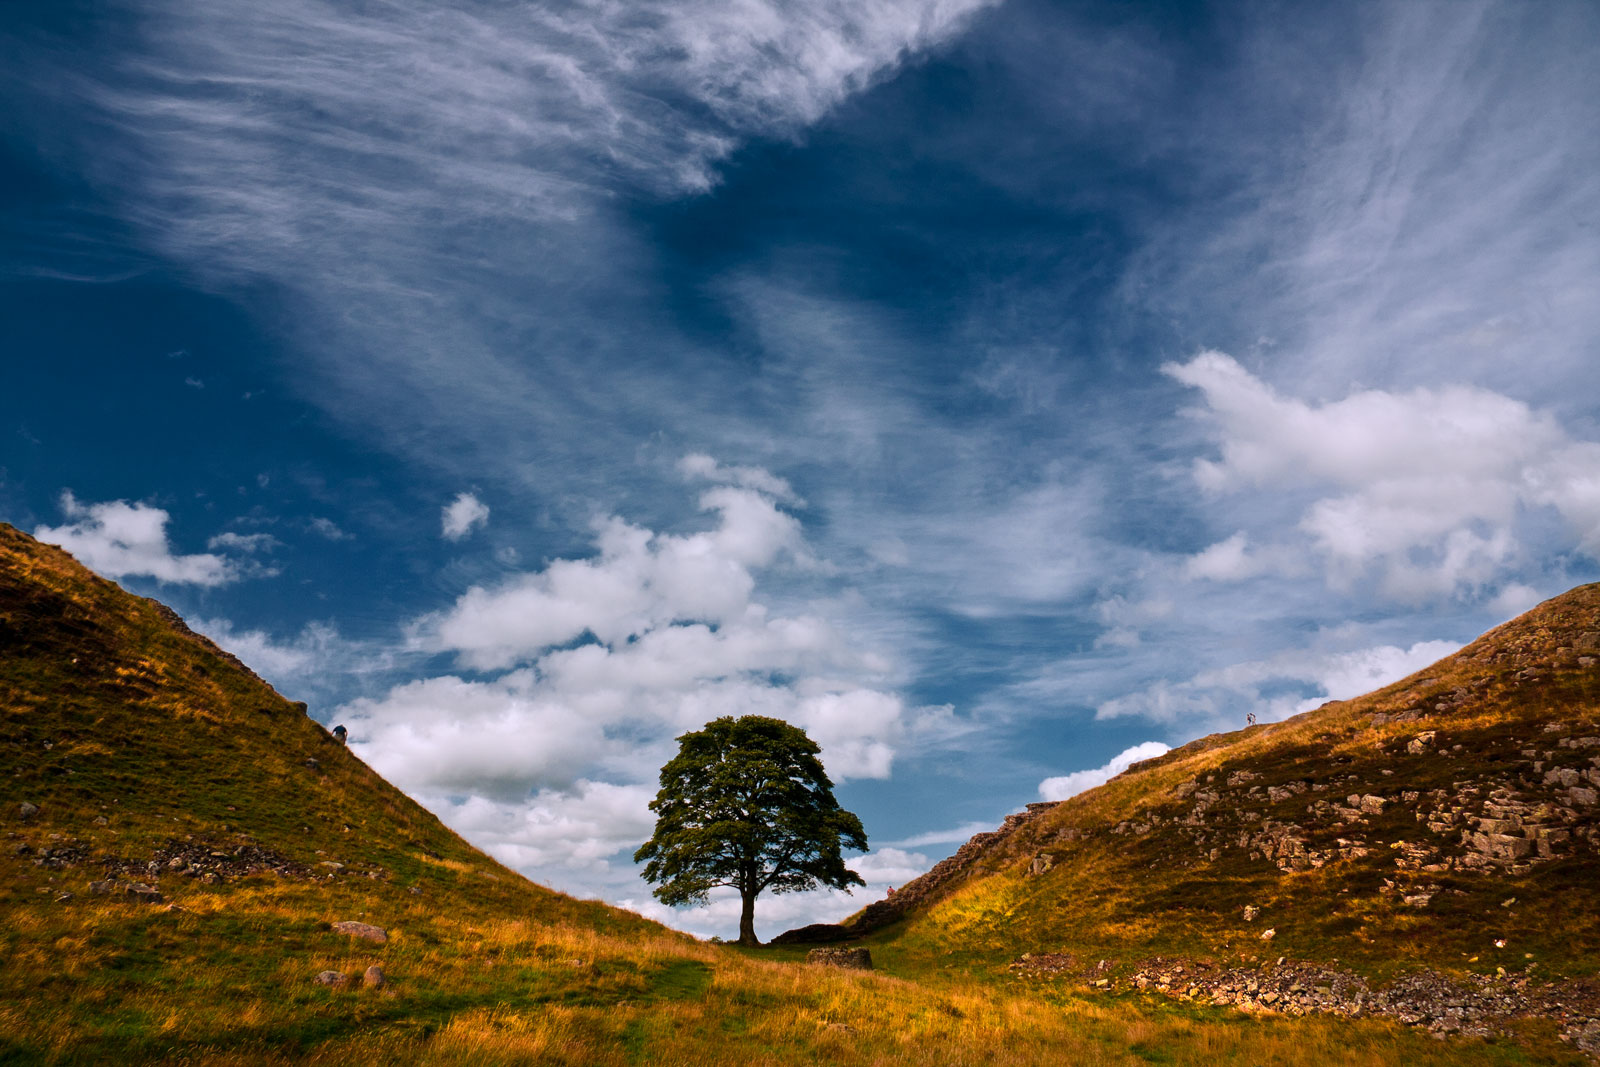 sycamore_gap_by_newcastlemale-d4oijxl.jpg